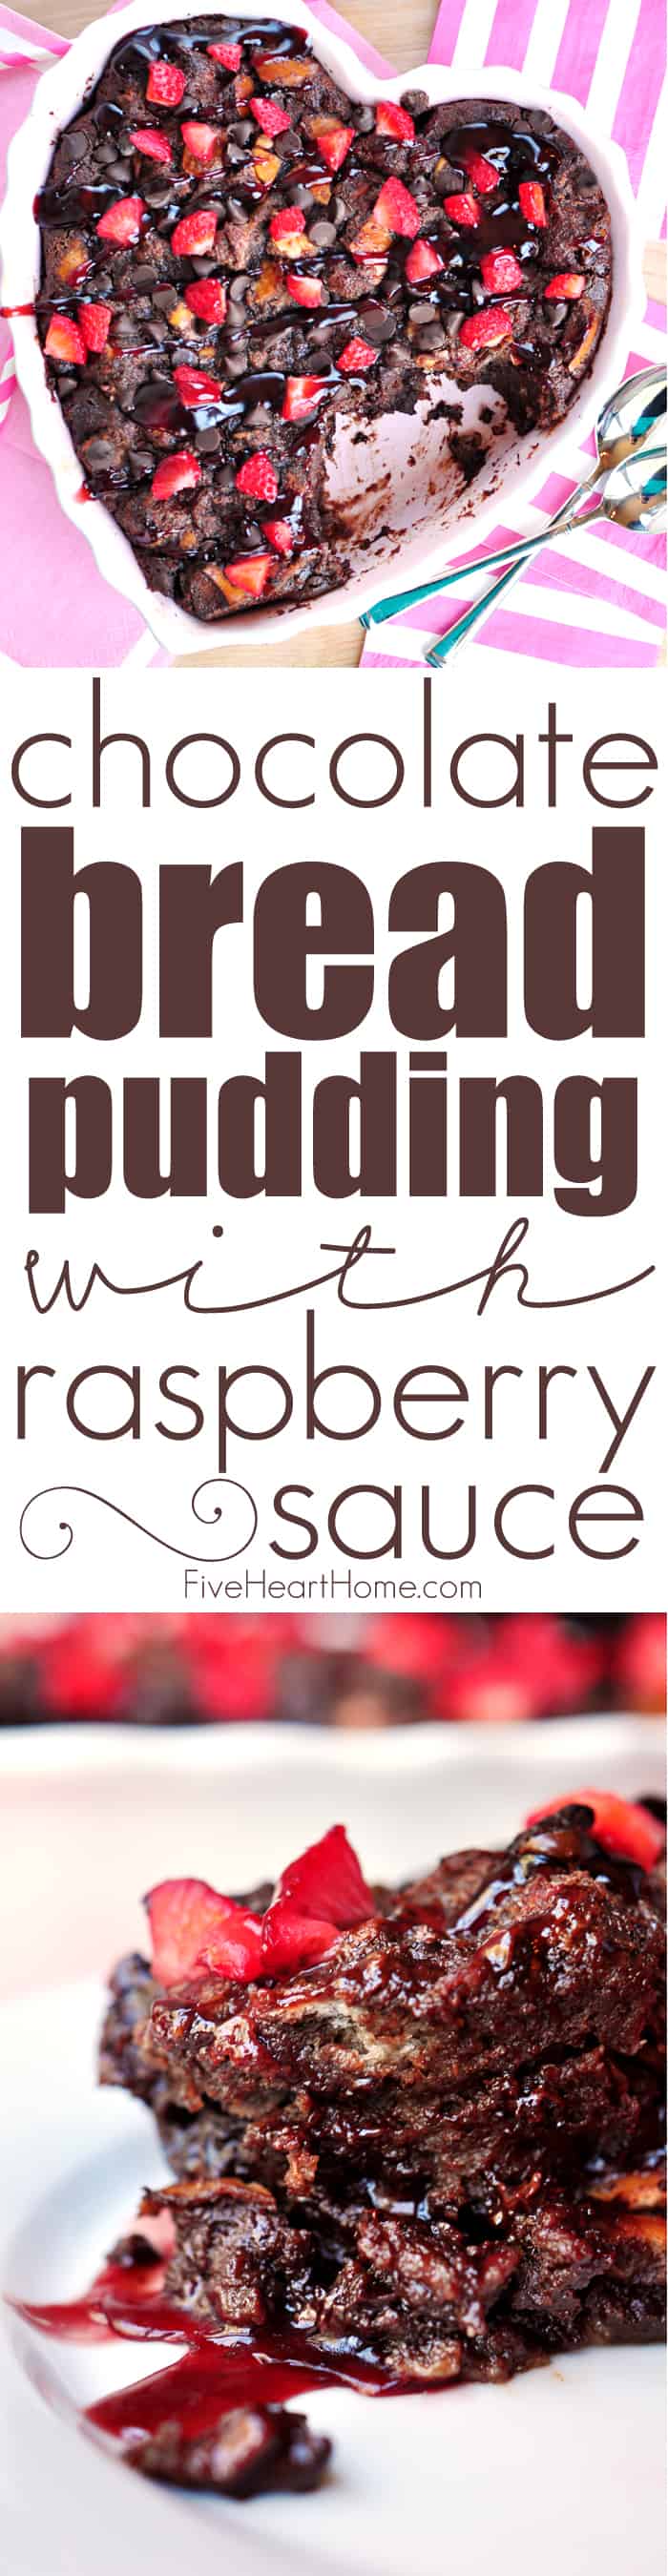 Chocolate Bread Pudding with Raspberry Sauce ~ warm, decadent dessert for your favorite chocoholic! Recipe includes a variation for Kahlua Chocolate Bread Pudding. | FiveHeartHome.com via @fivehearthome